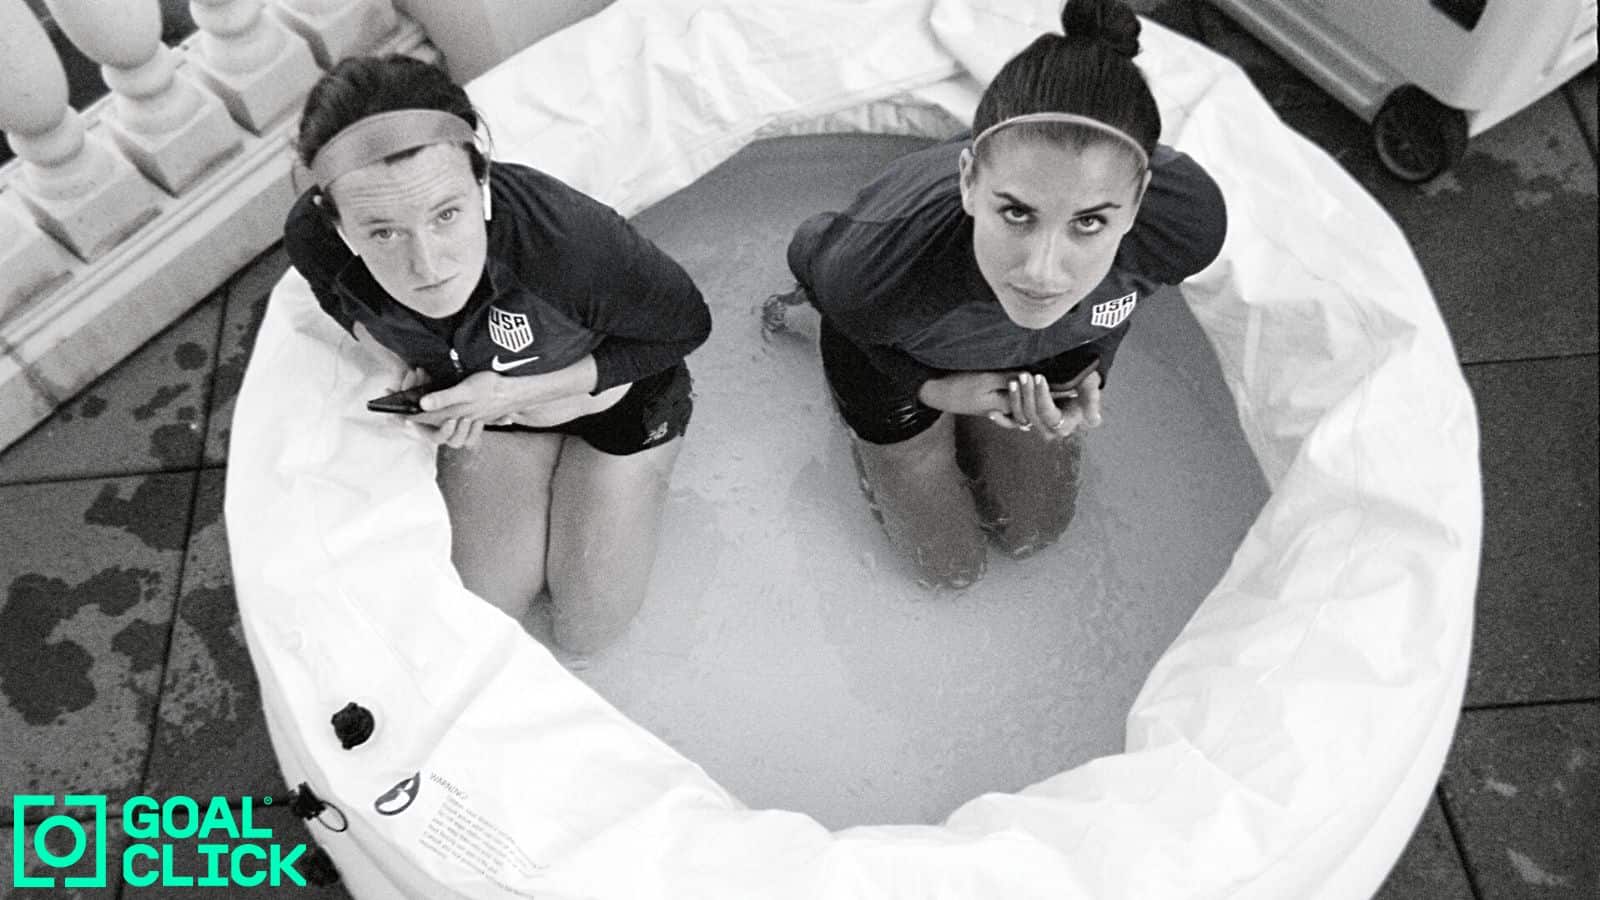 A photo from a Goal Click series at the 2019 Women's World Cup of Alex Morgan and Rose Lavelle sitting in their uniforms in a blow up pool with water.